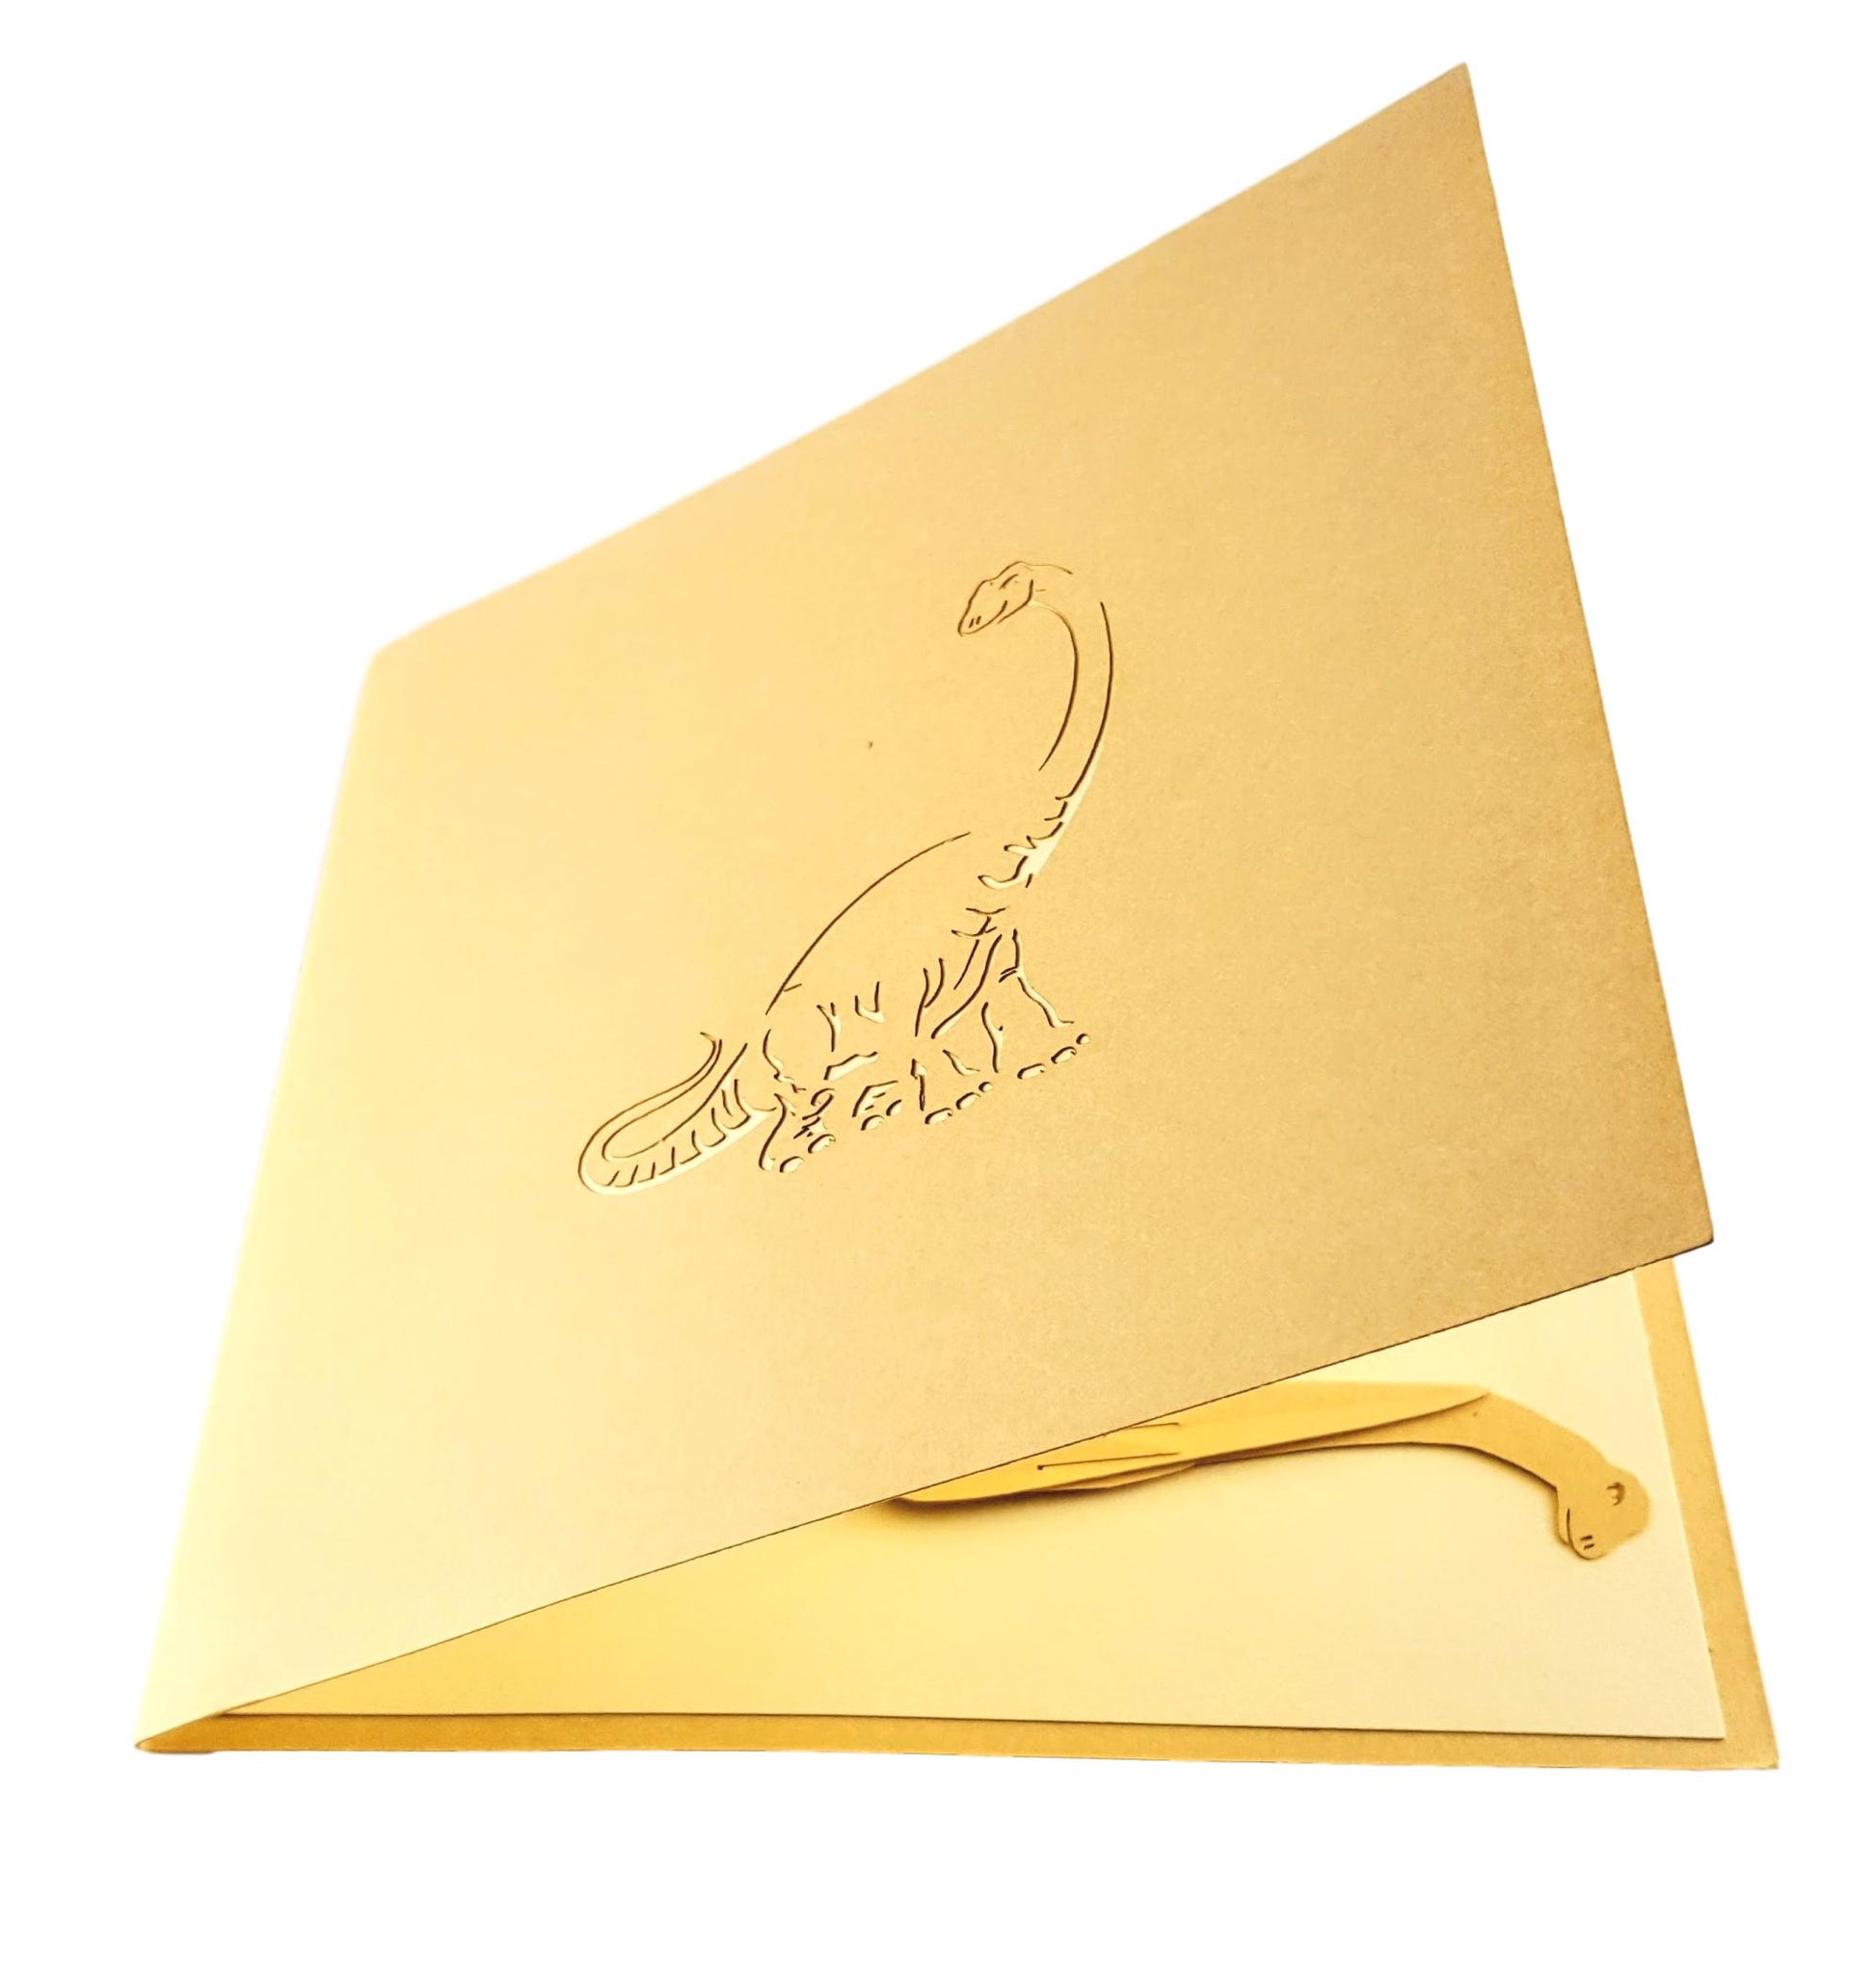 Long Neck Dinosaur 3D Pop Up Greeting Card - 99 shipping July 2020 - Animals - Birthday - Dino - Din - iGifts And Cards